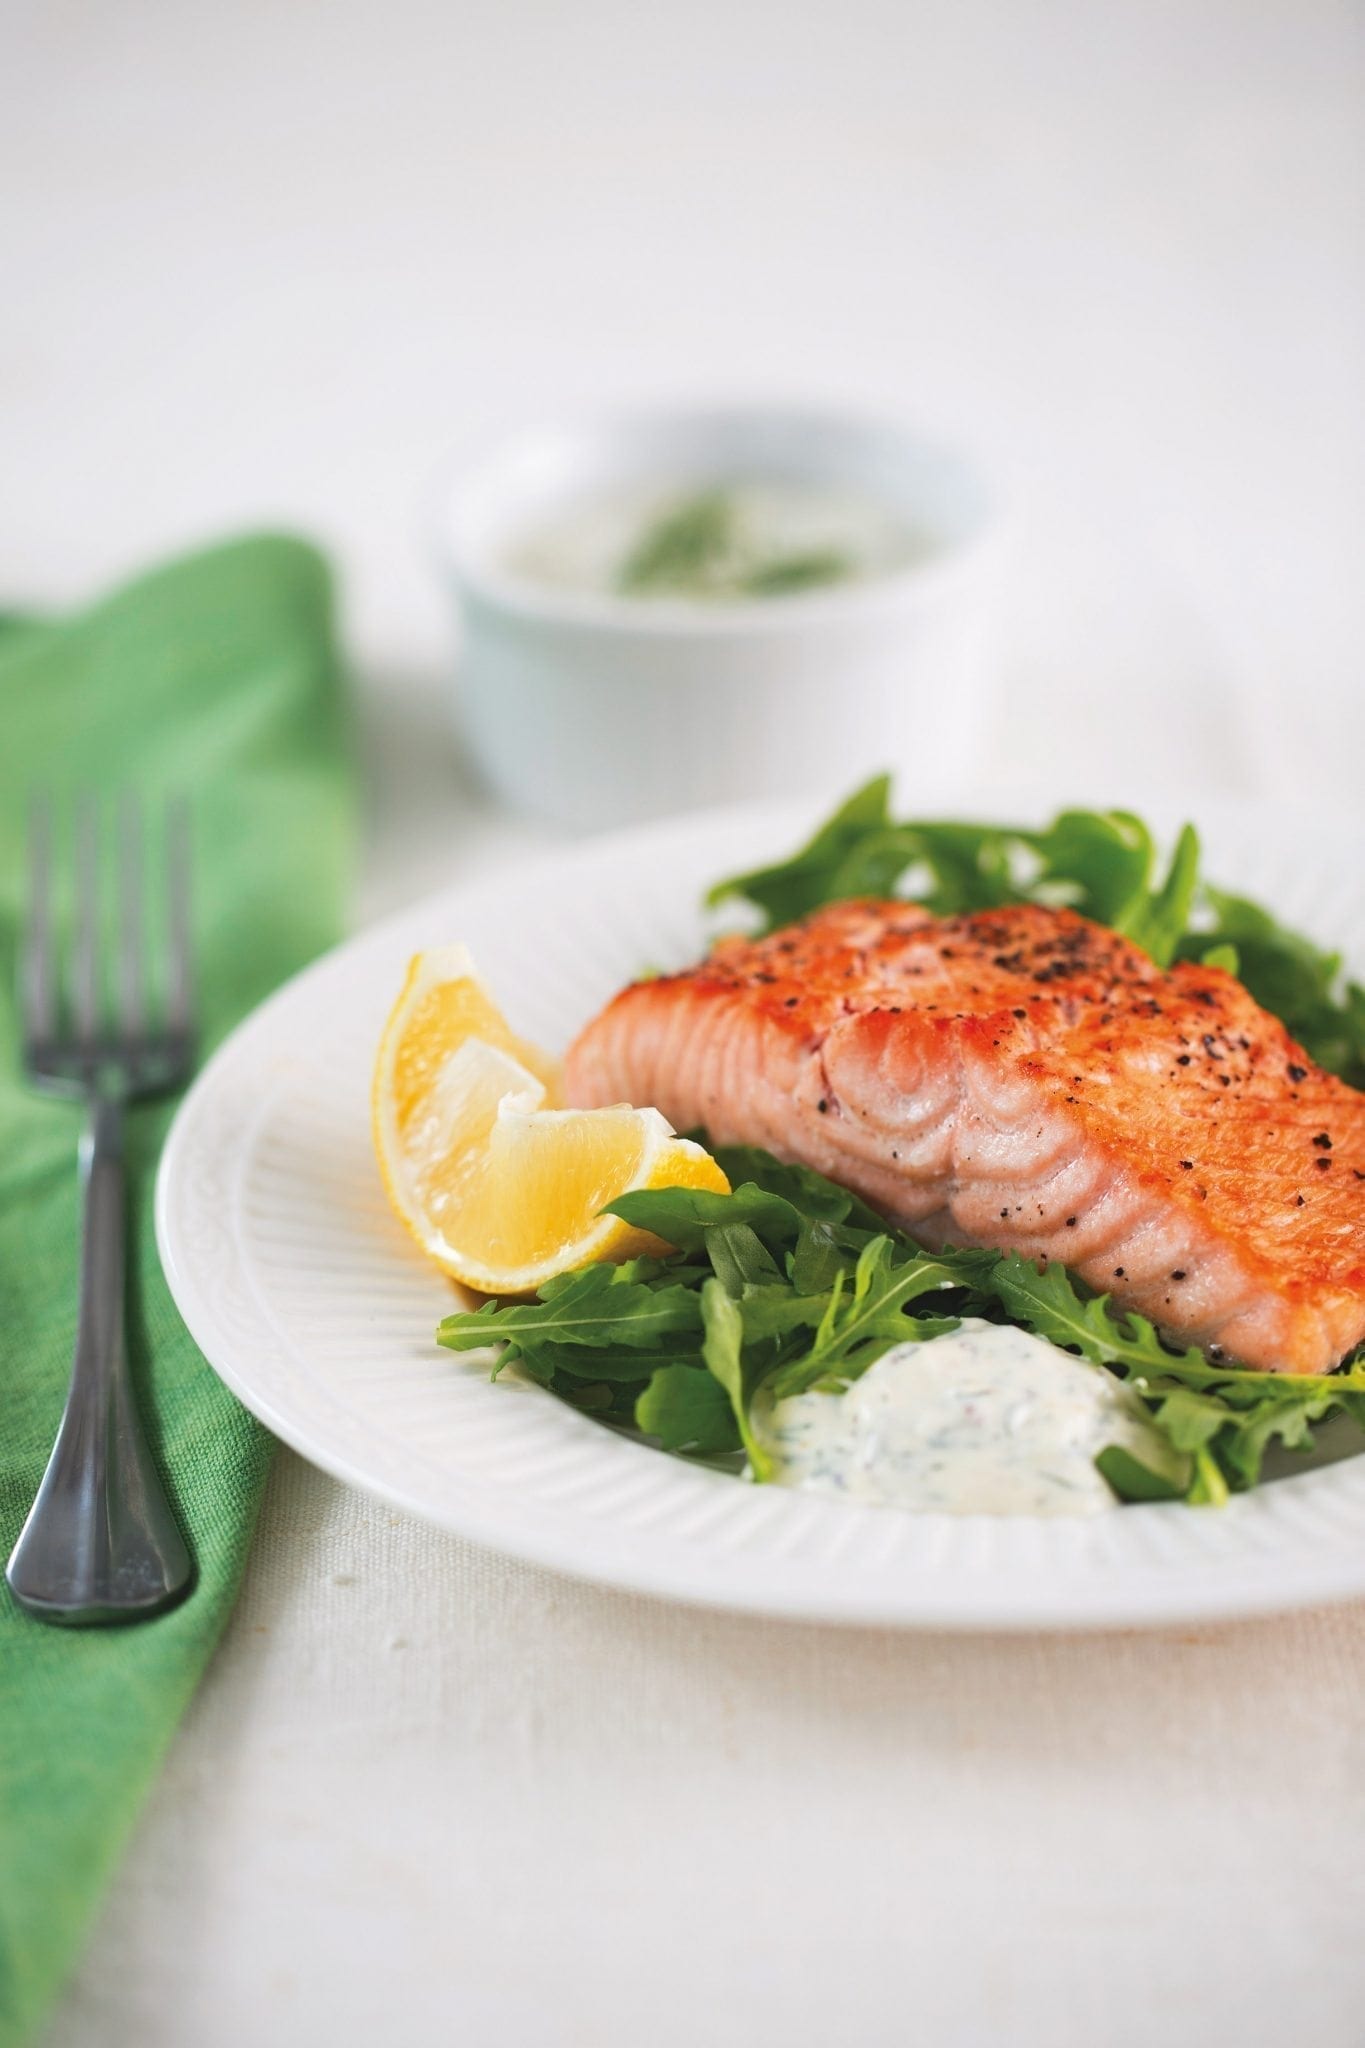 Baked Salmon with Mustard-Dill Sauce